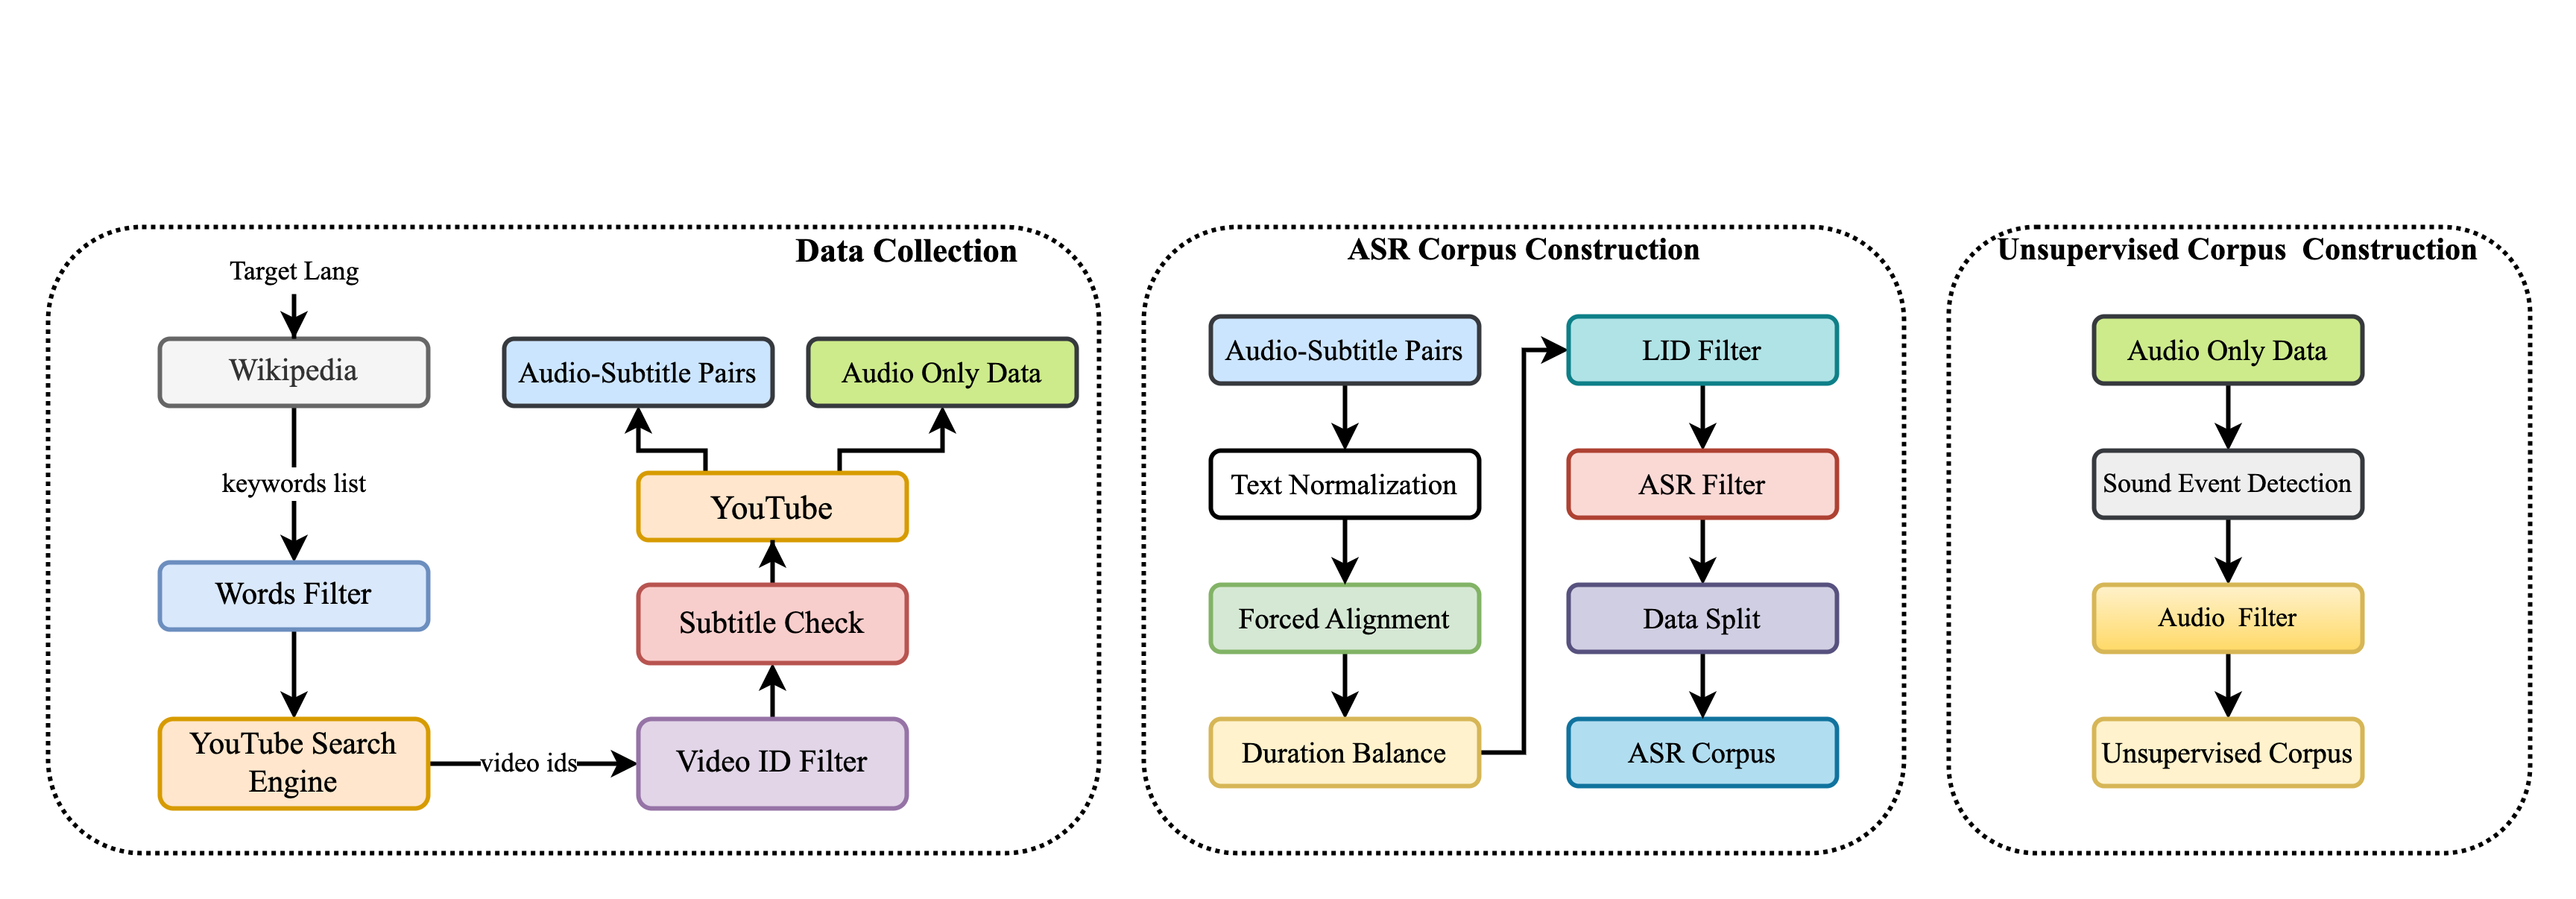 MSR-86K: An Evolving, Multilingual Corpus with 86,300 Hours of Transcribed Audio for Speech Recognition Research